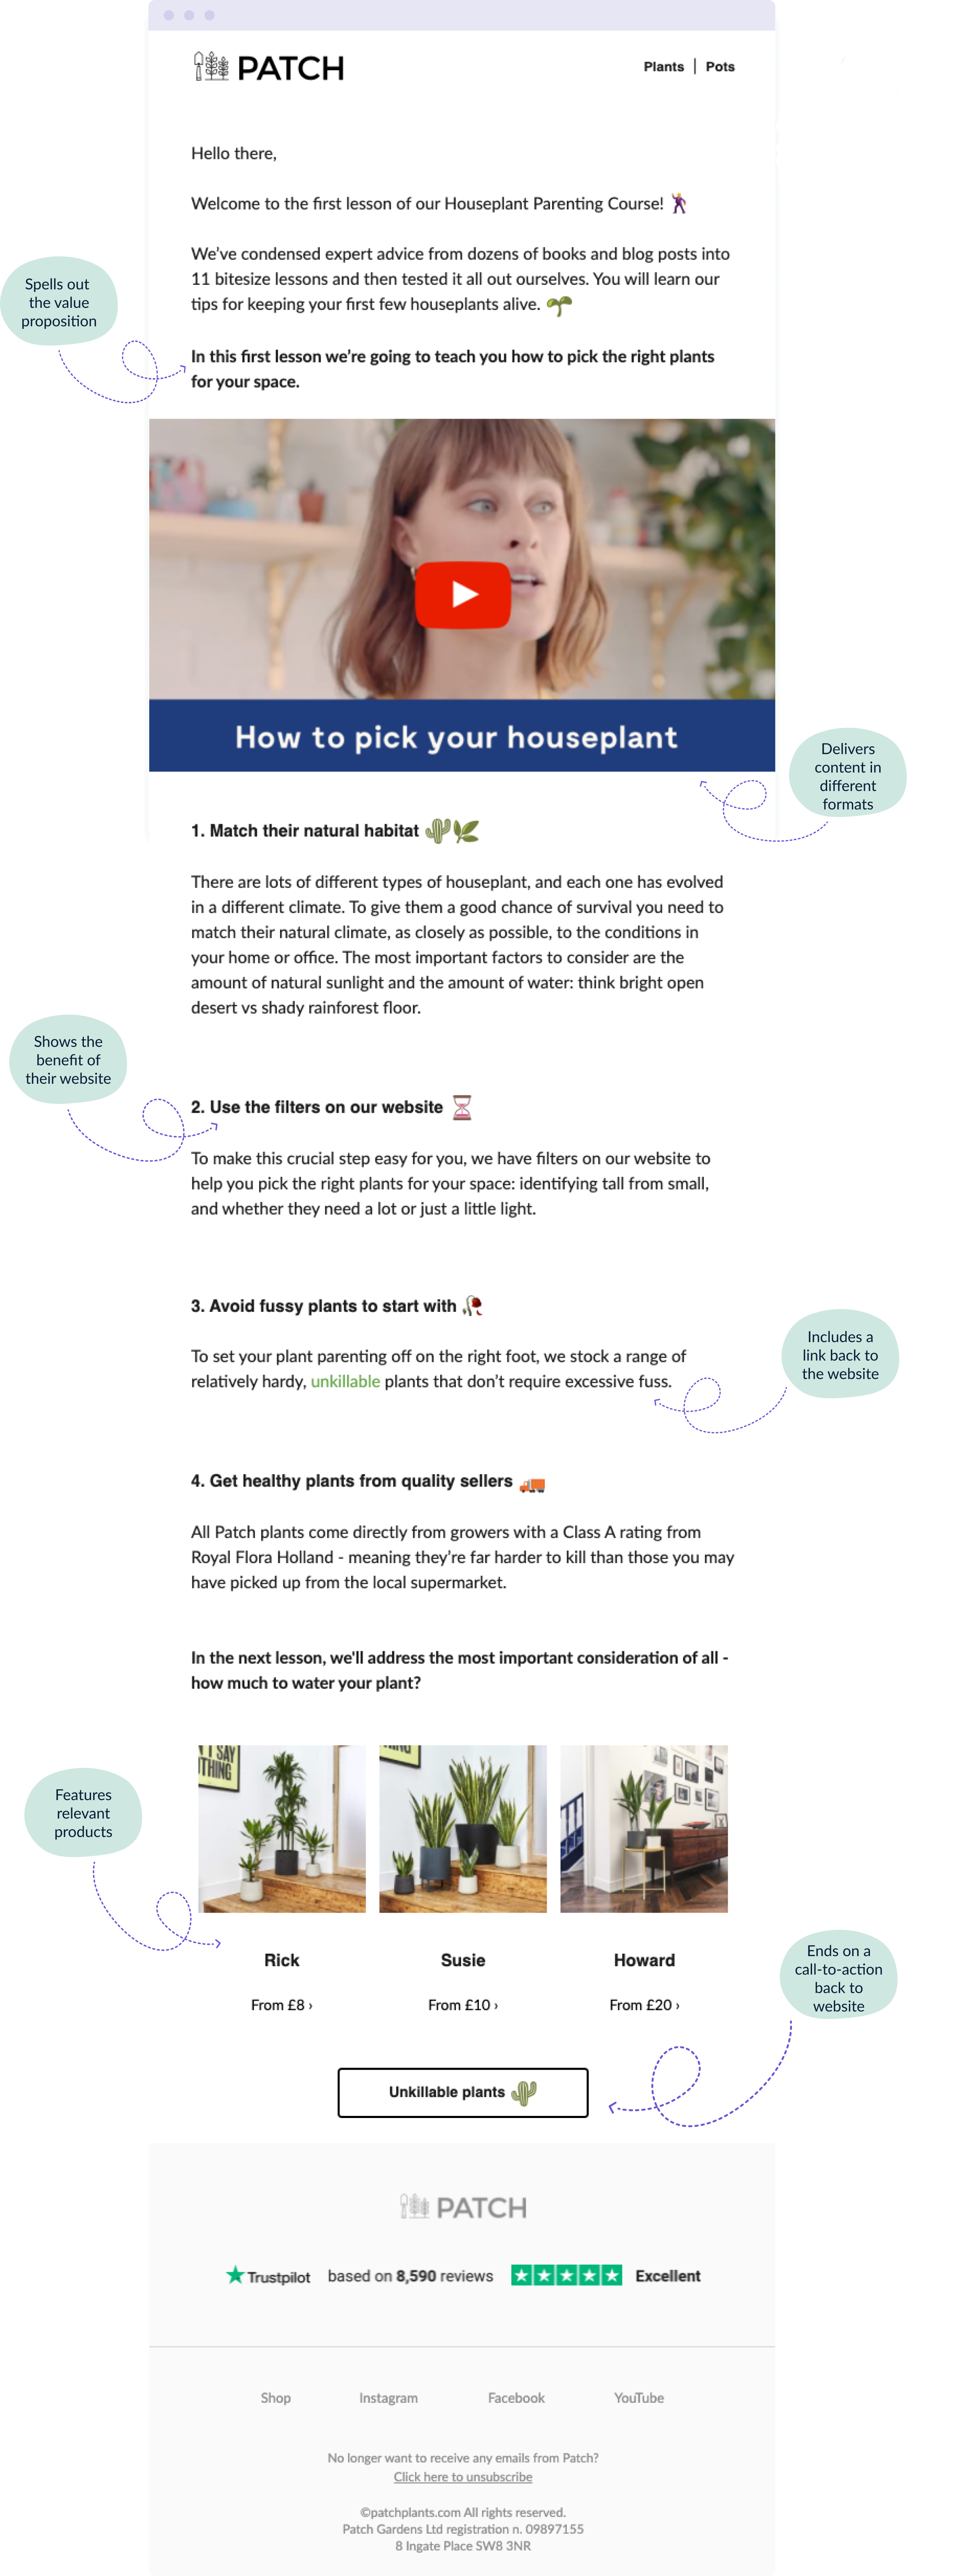 Example of an email from Patch Plant's Houseplant Parenting email course showing you how to tie back the content to your business goal